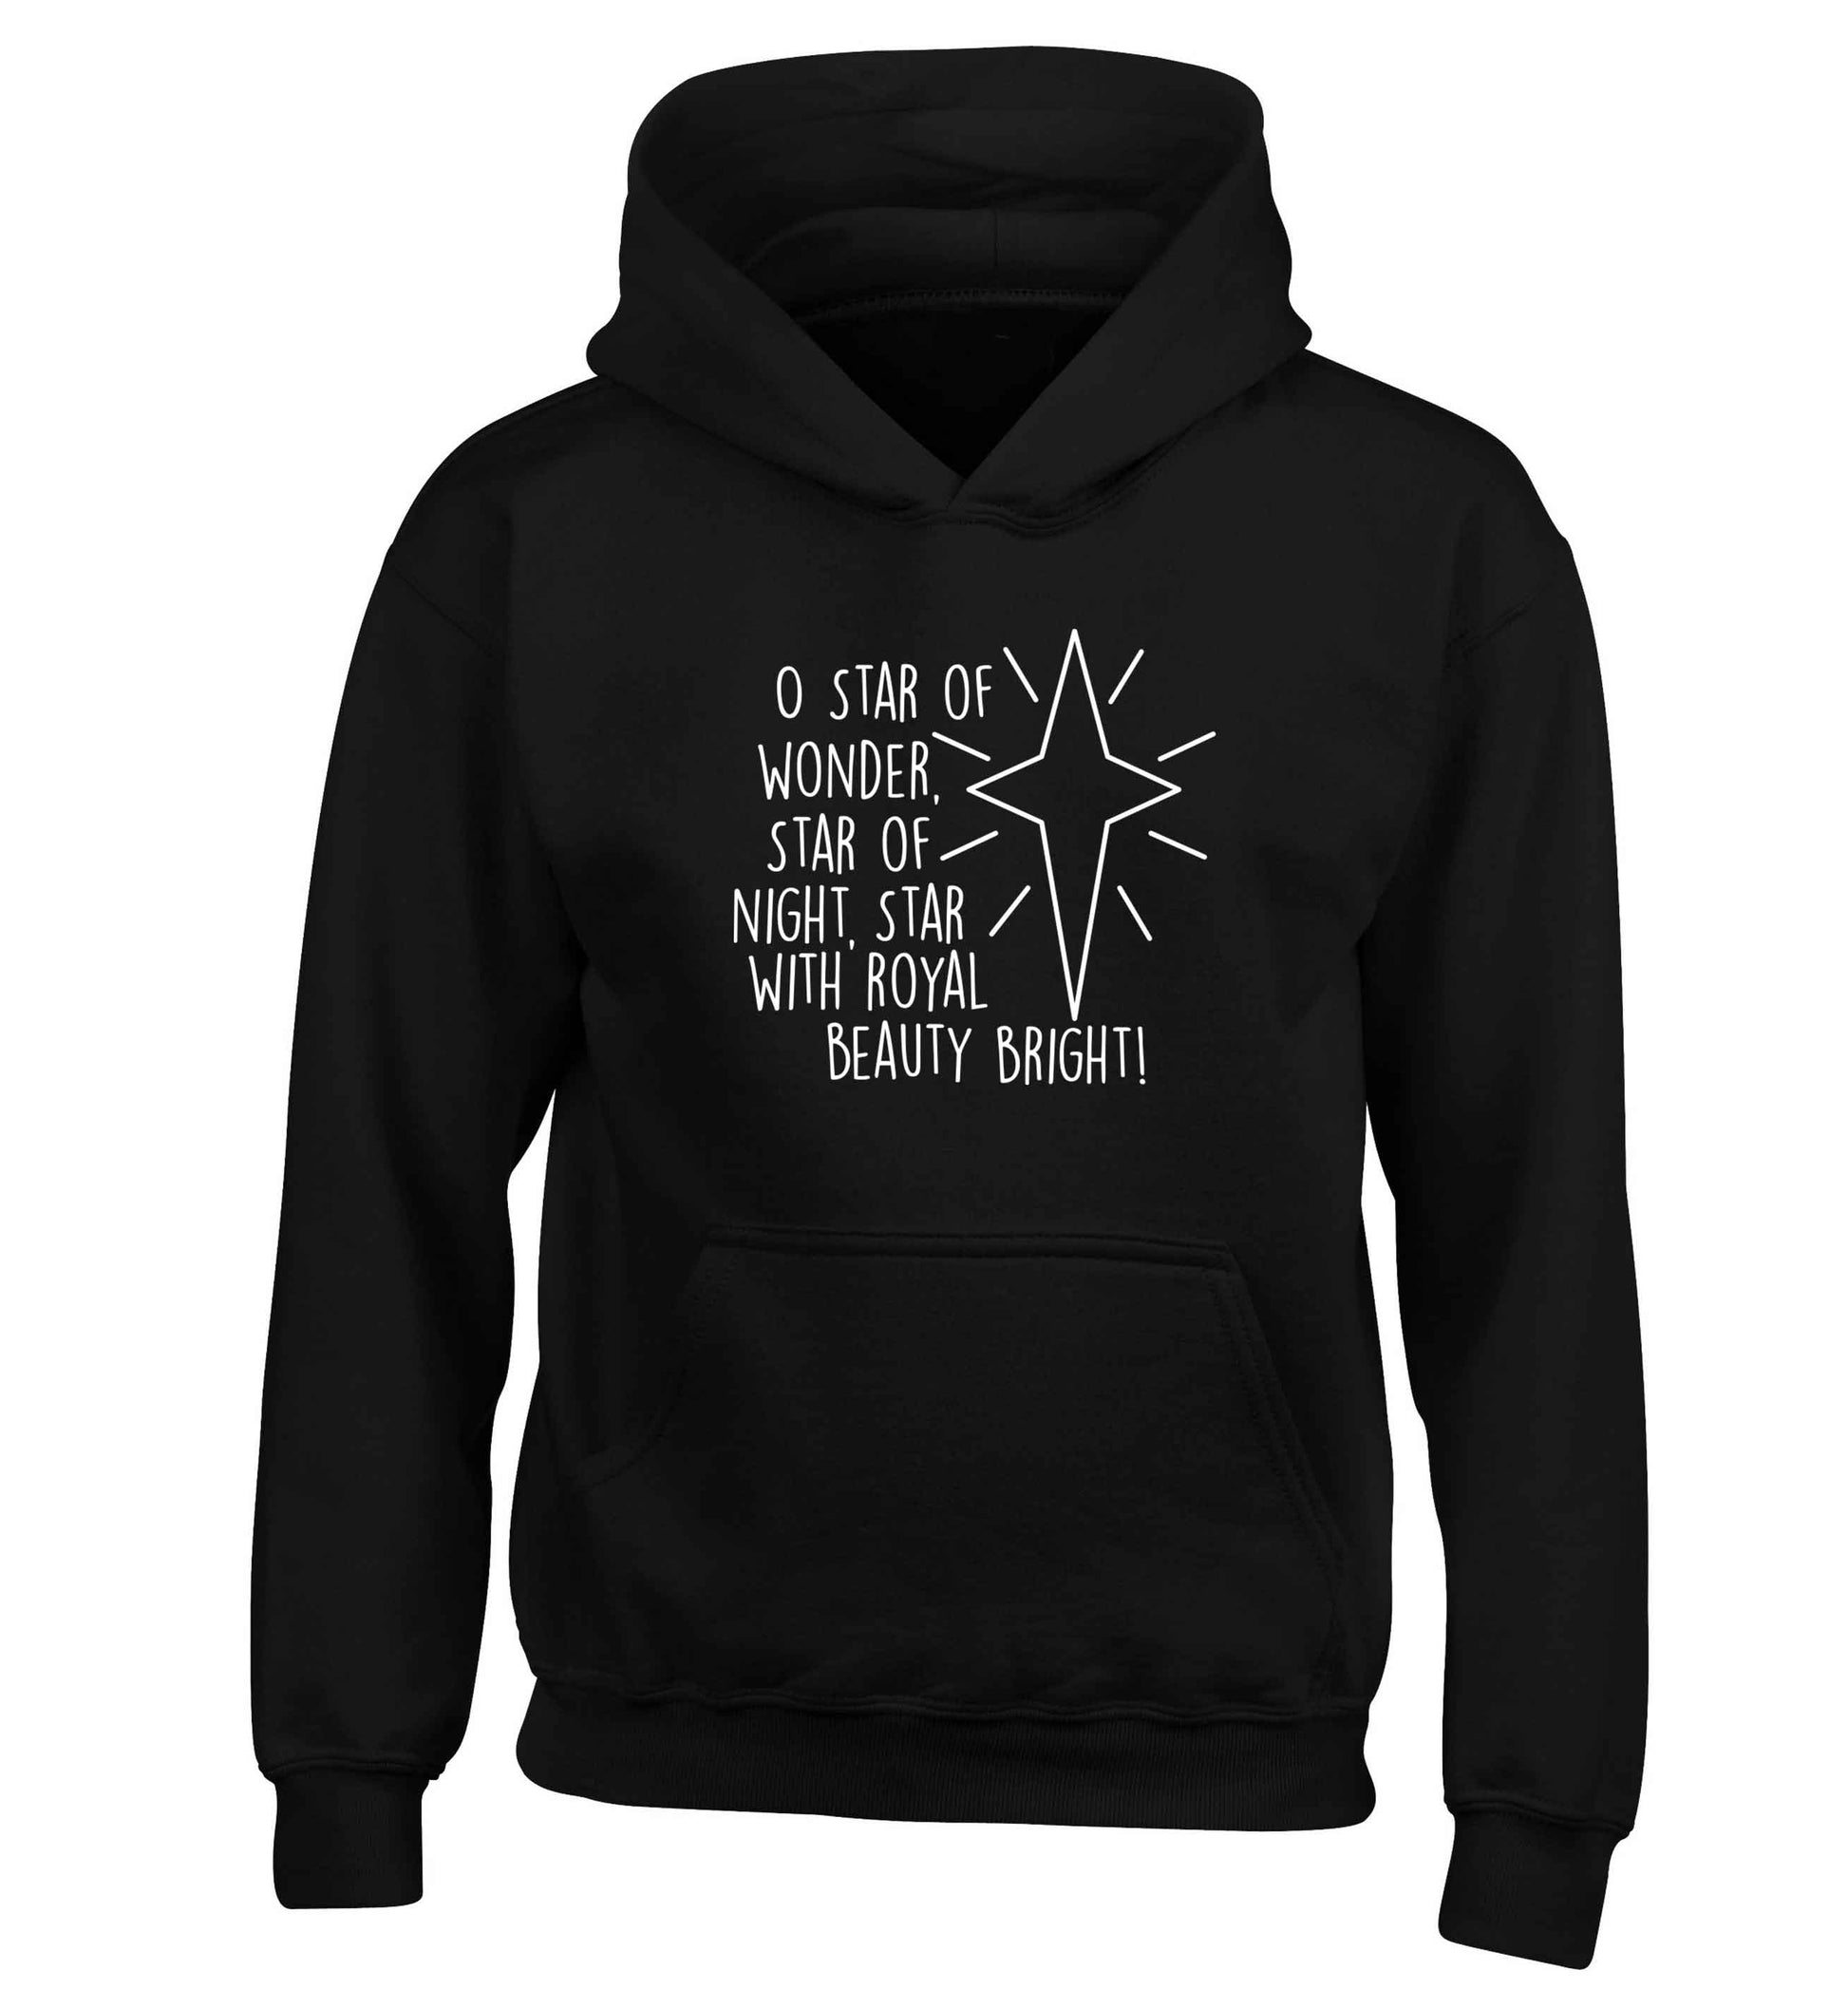 Oh star of wonder star of night, star with royal beauty bright children's black hoodie 12-13 Years